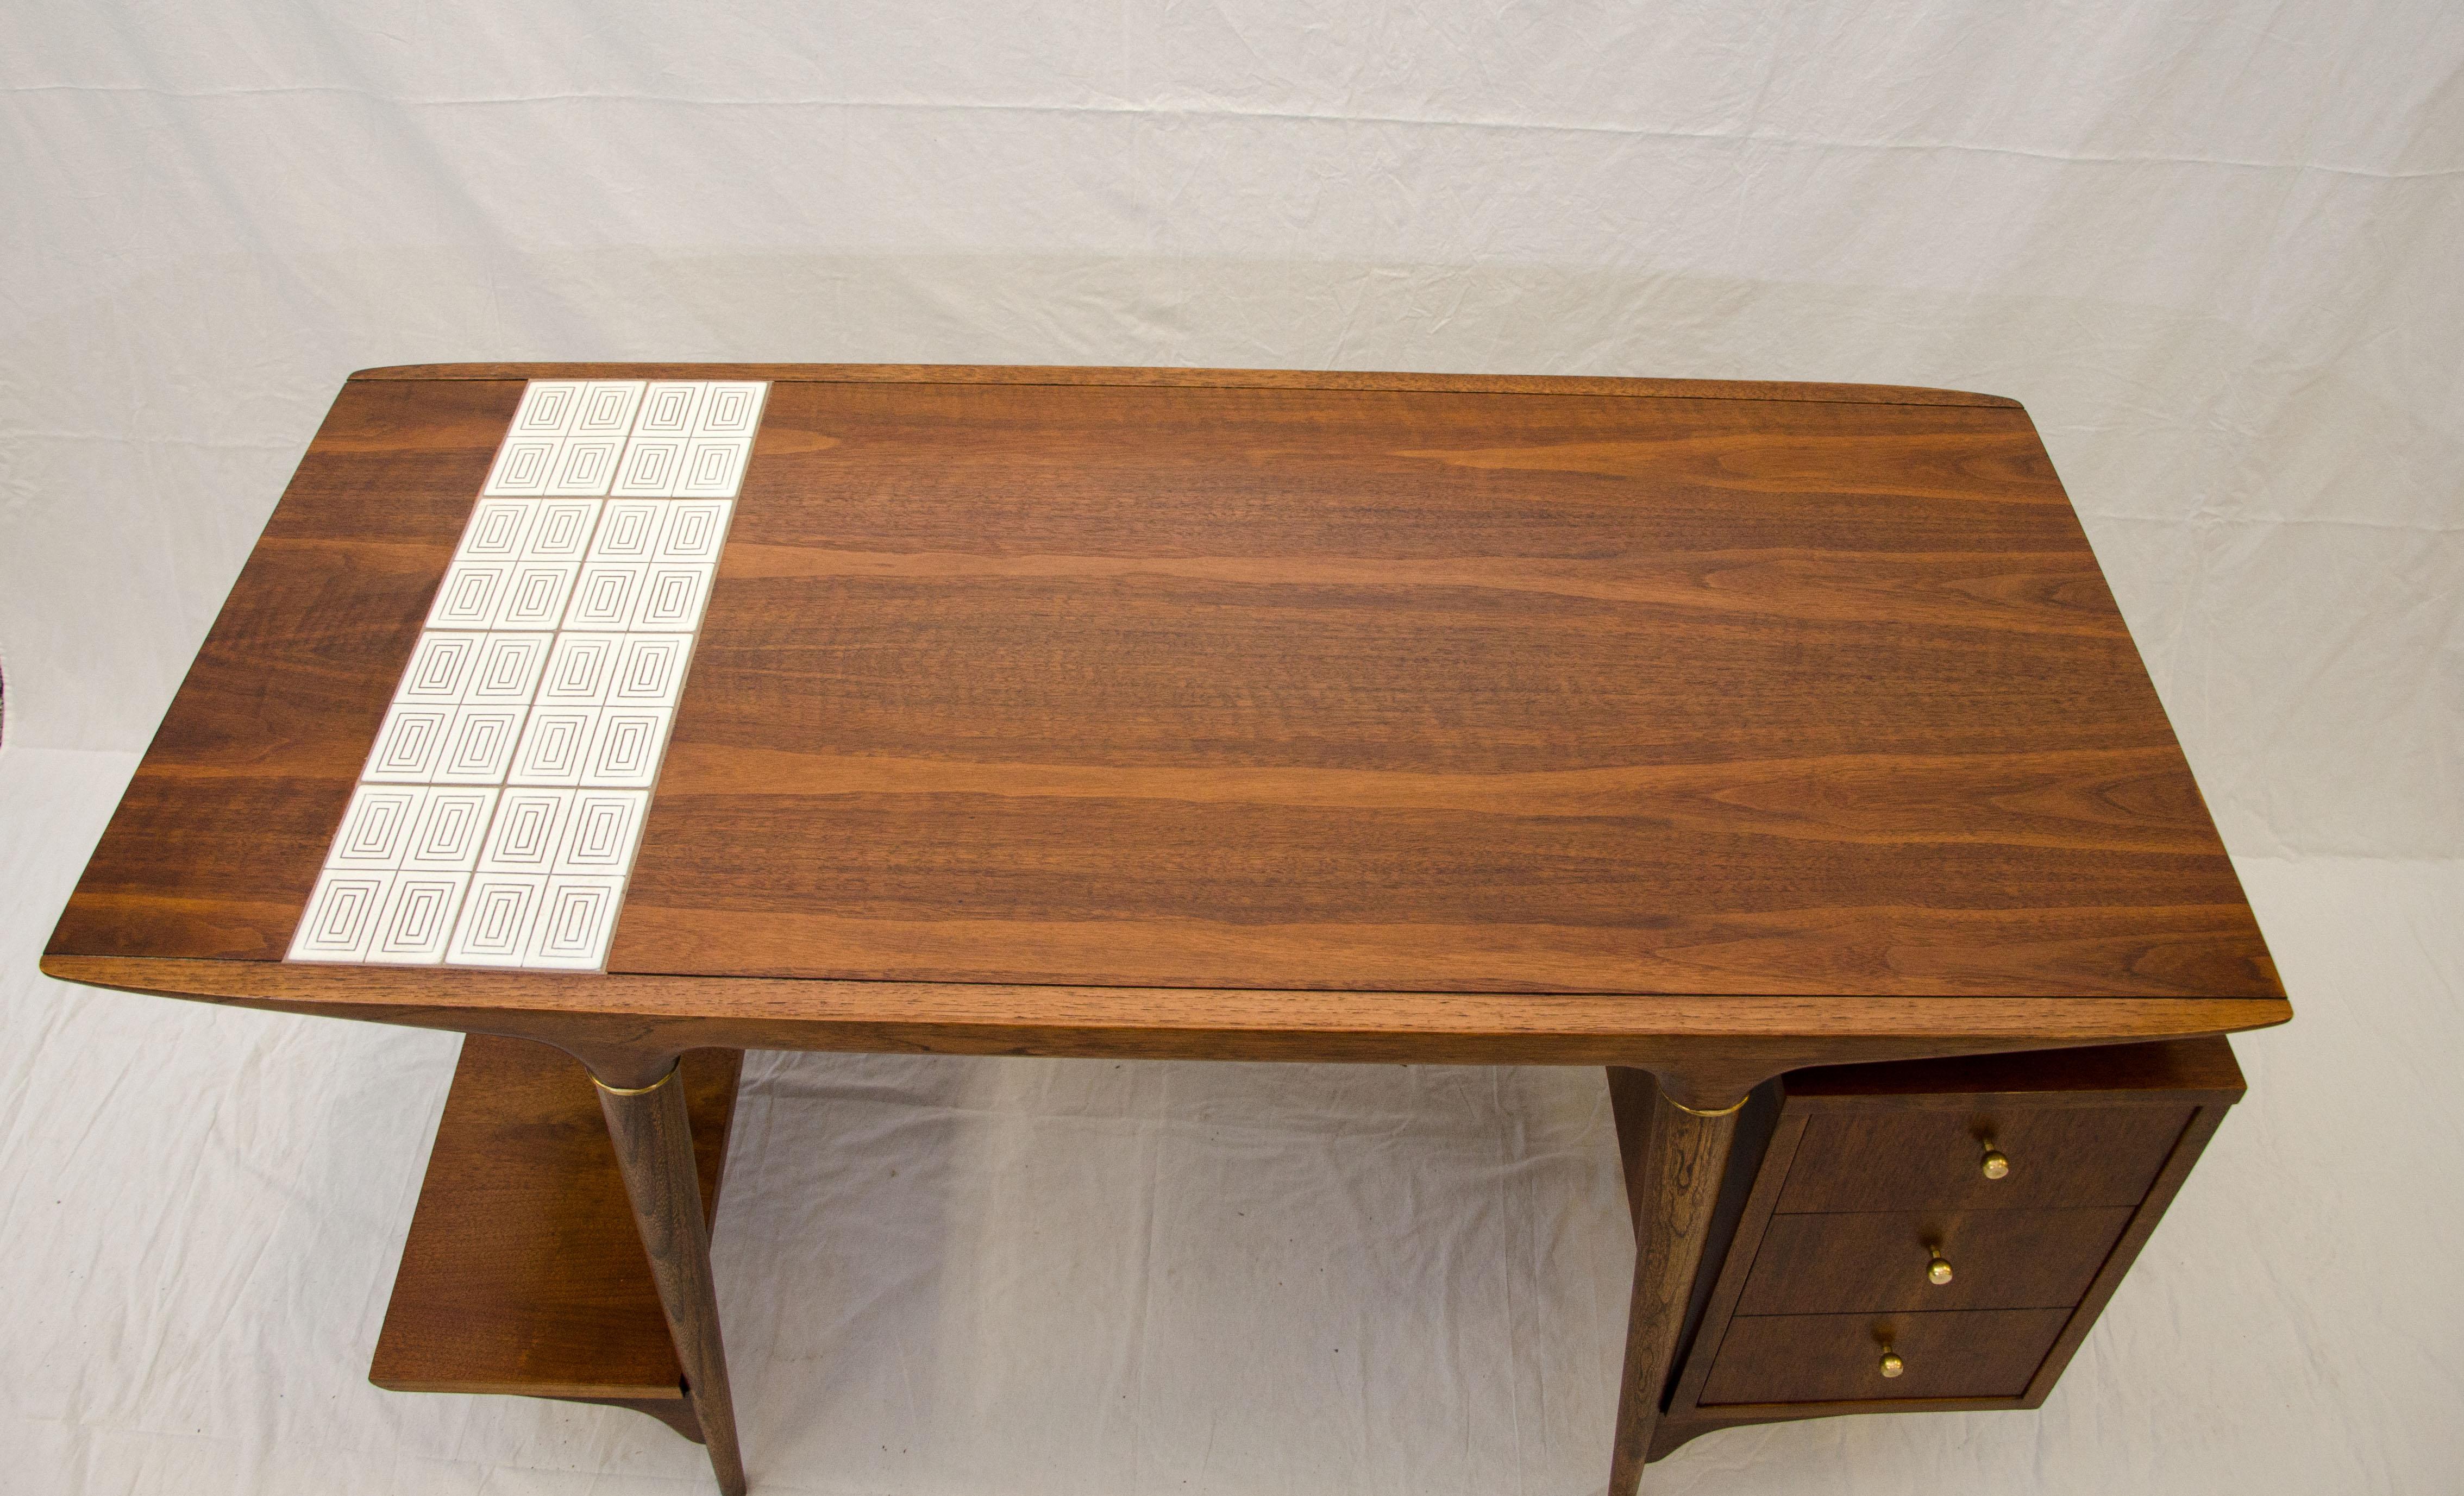 Mid-Century Modern Unusual Mid Century Desk by Lane, with Floating Drawer Cabinet & Tile Insert